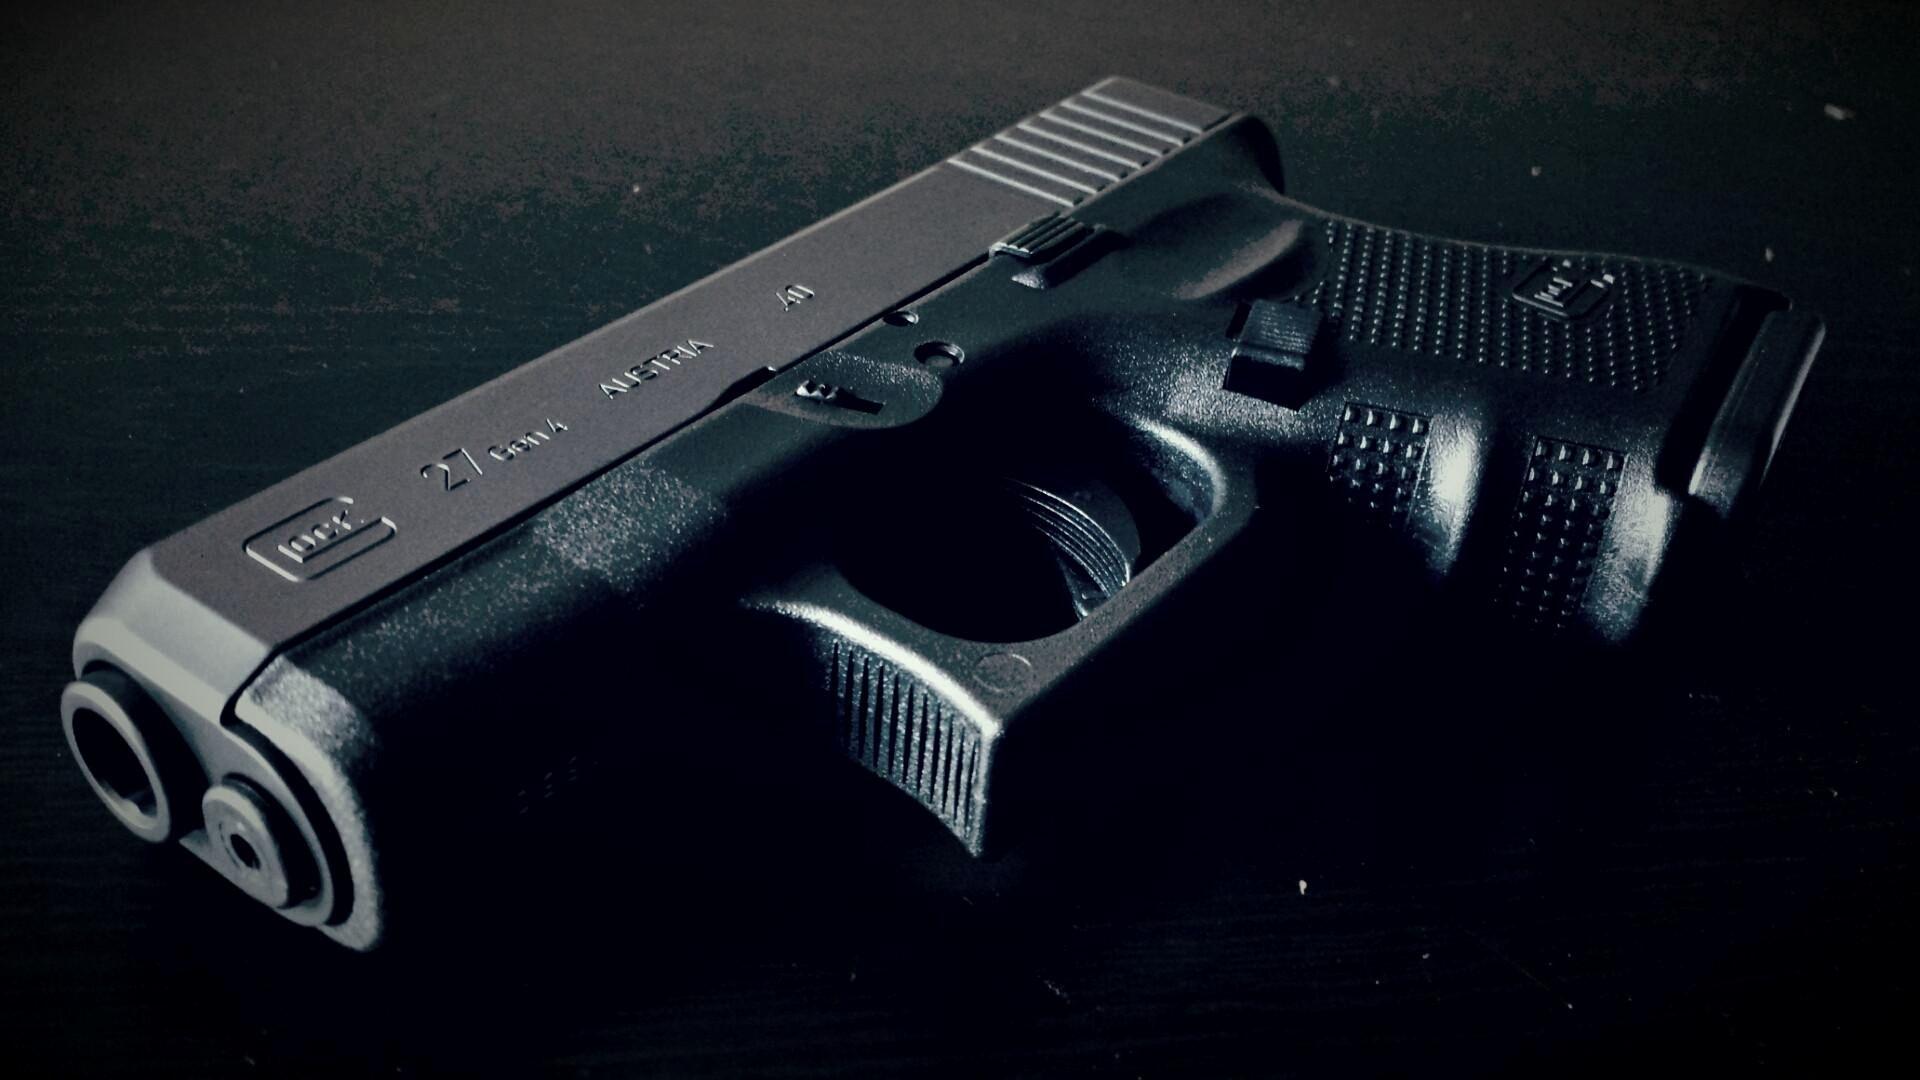 Awesome Glock Wallpaper Image Wallpaper Collection. HD